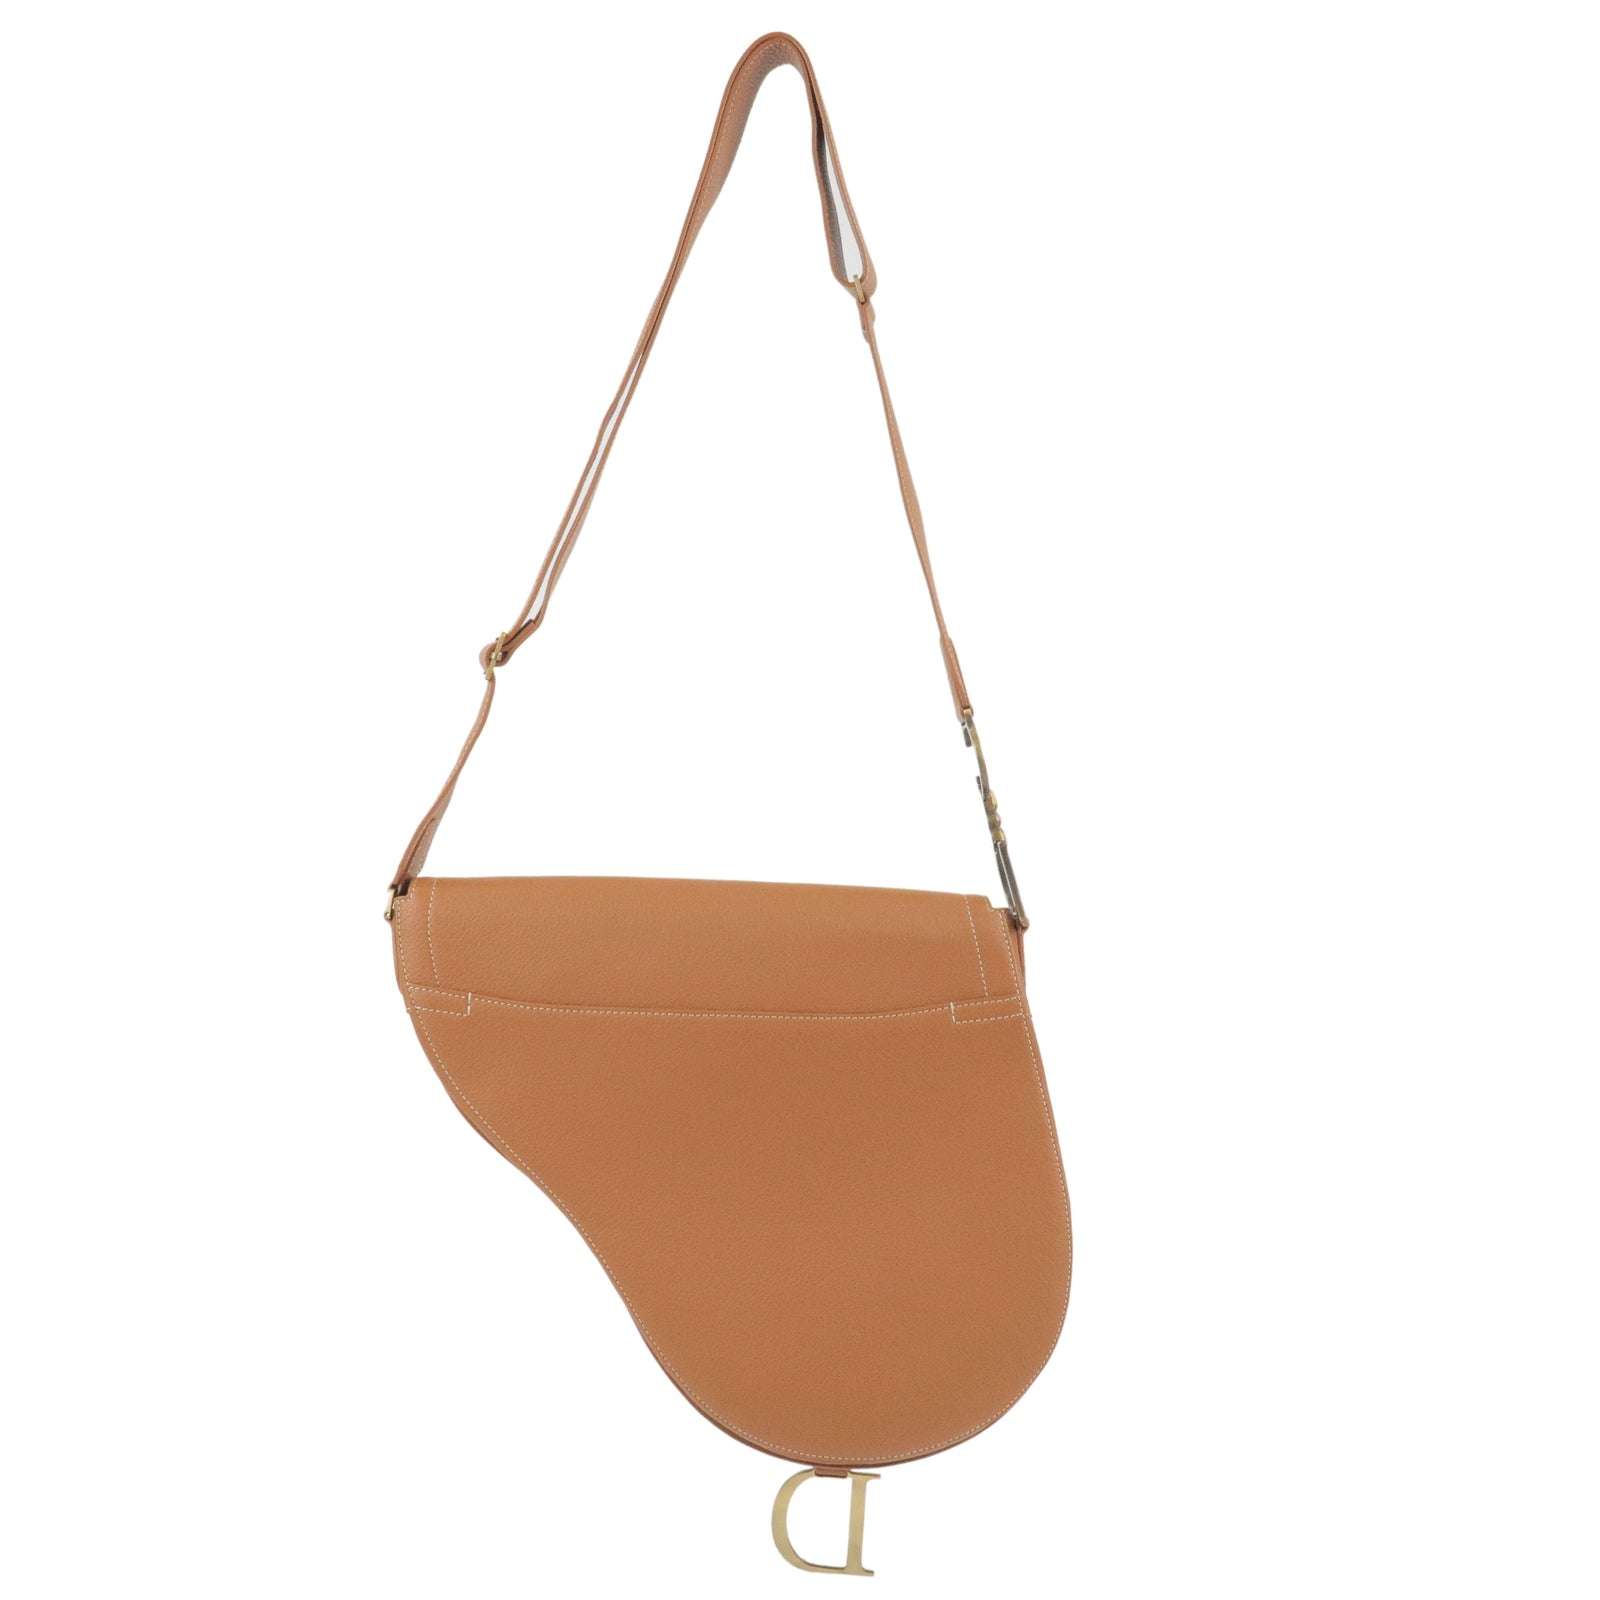 Handmade Leather Saddle Bag - Large | Beaumont Bags